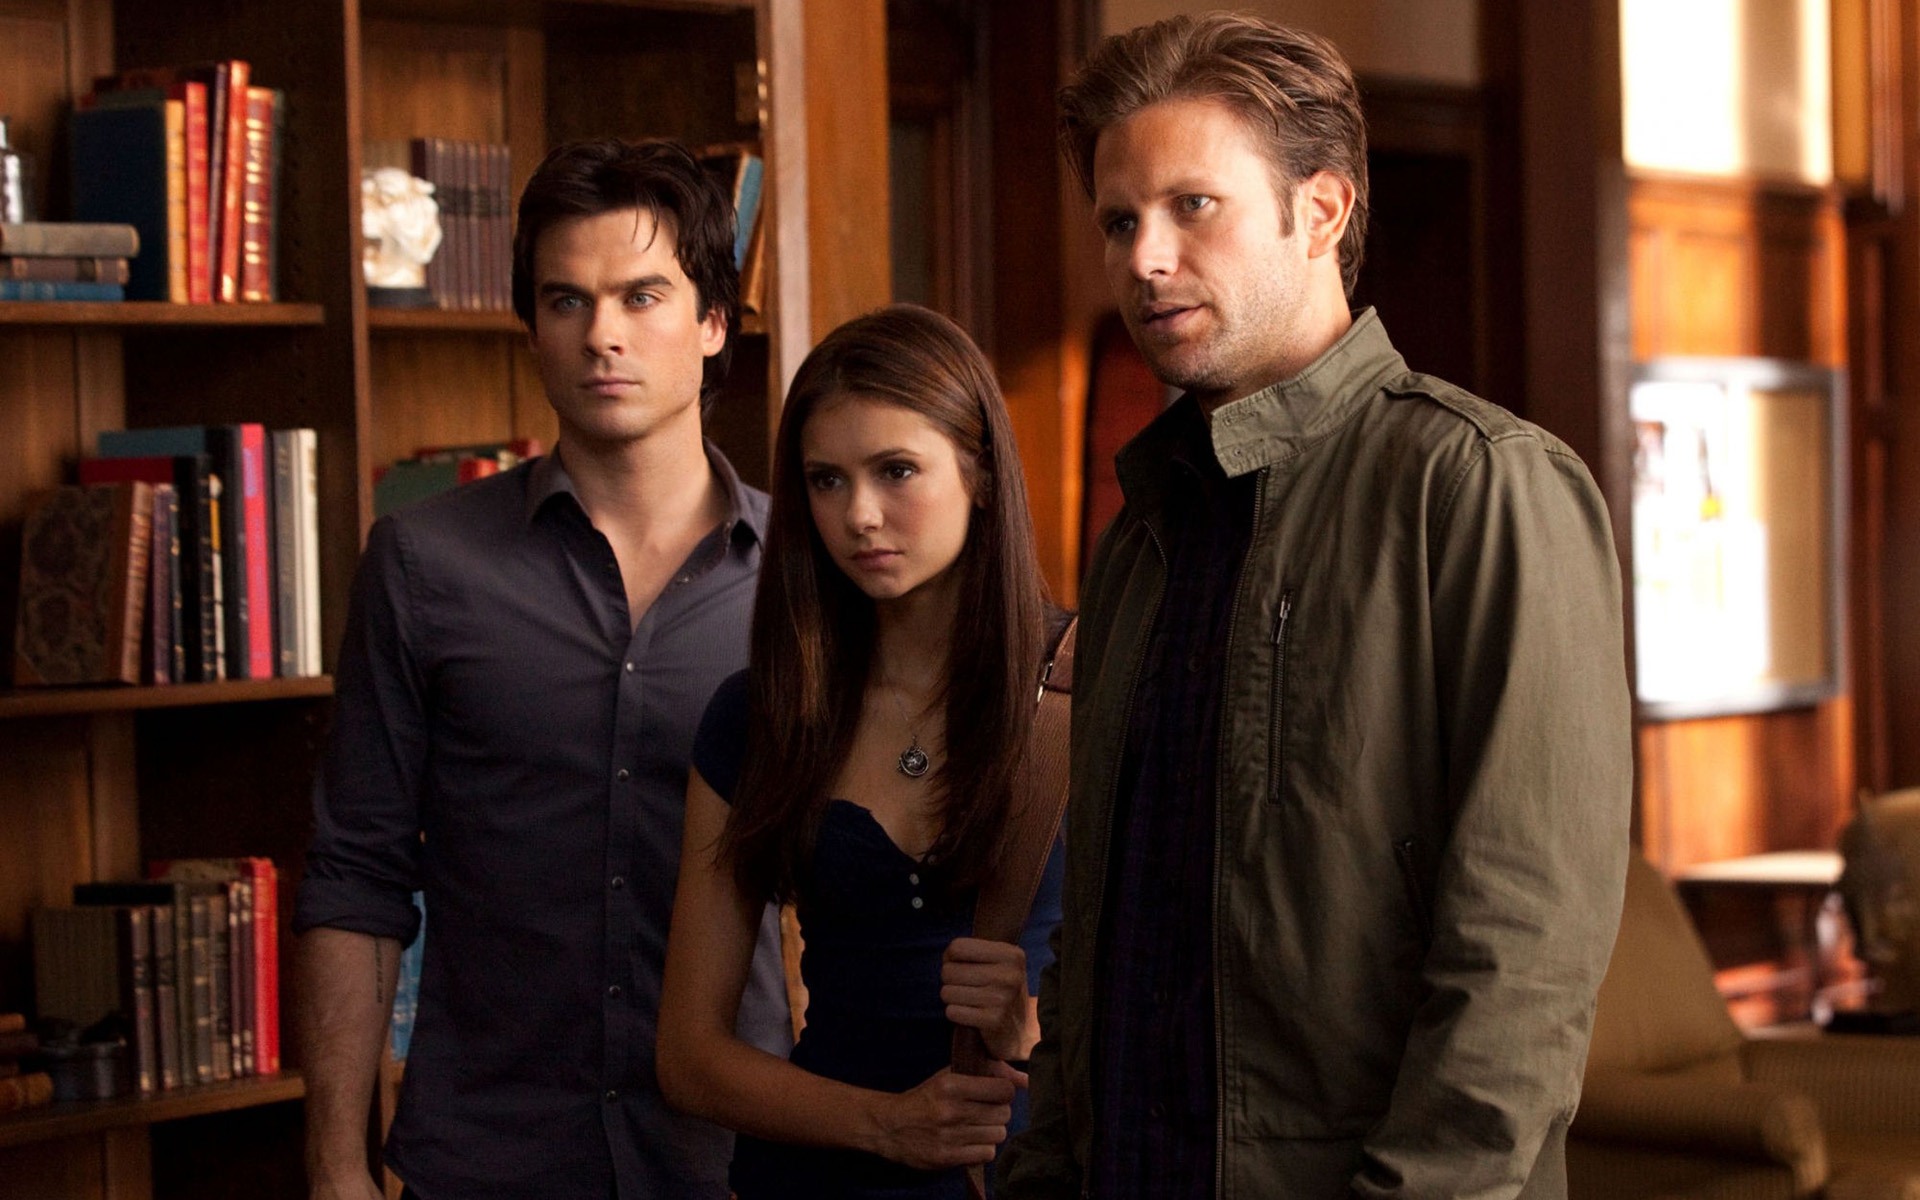 The Vampire Diaries HD Wallpapers #2 - 1920x1200